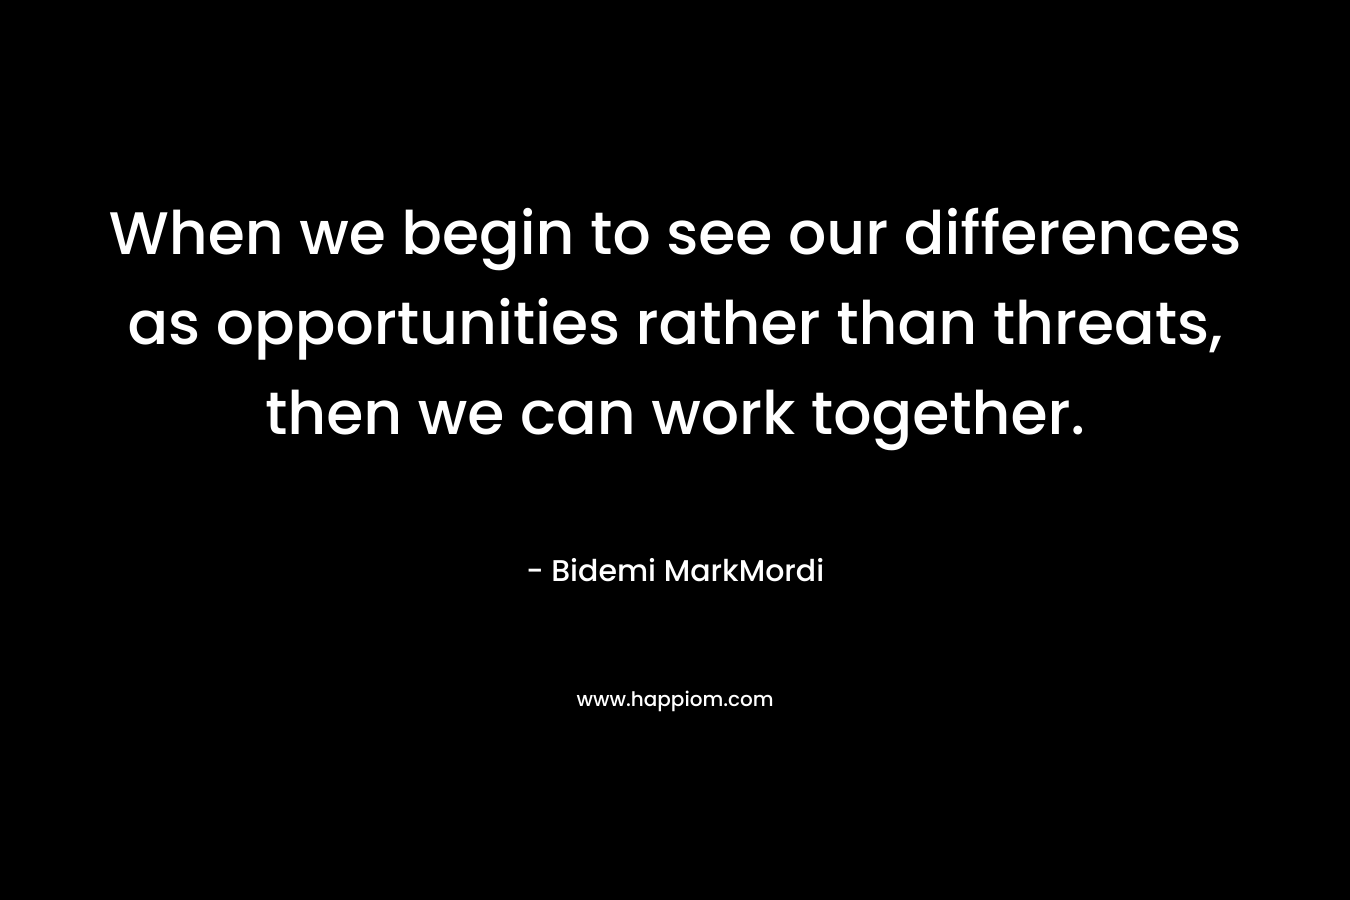 When we begin to see our differences as opportunities rather than threats, then we can work together.